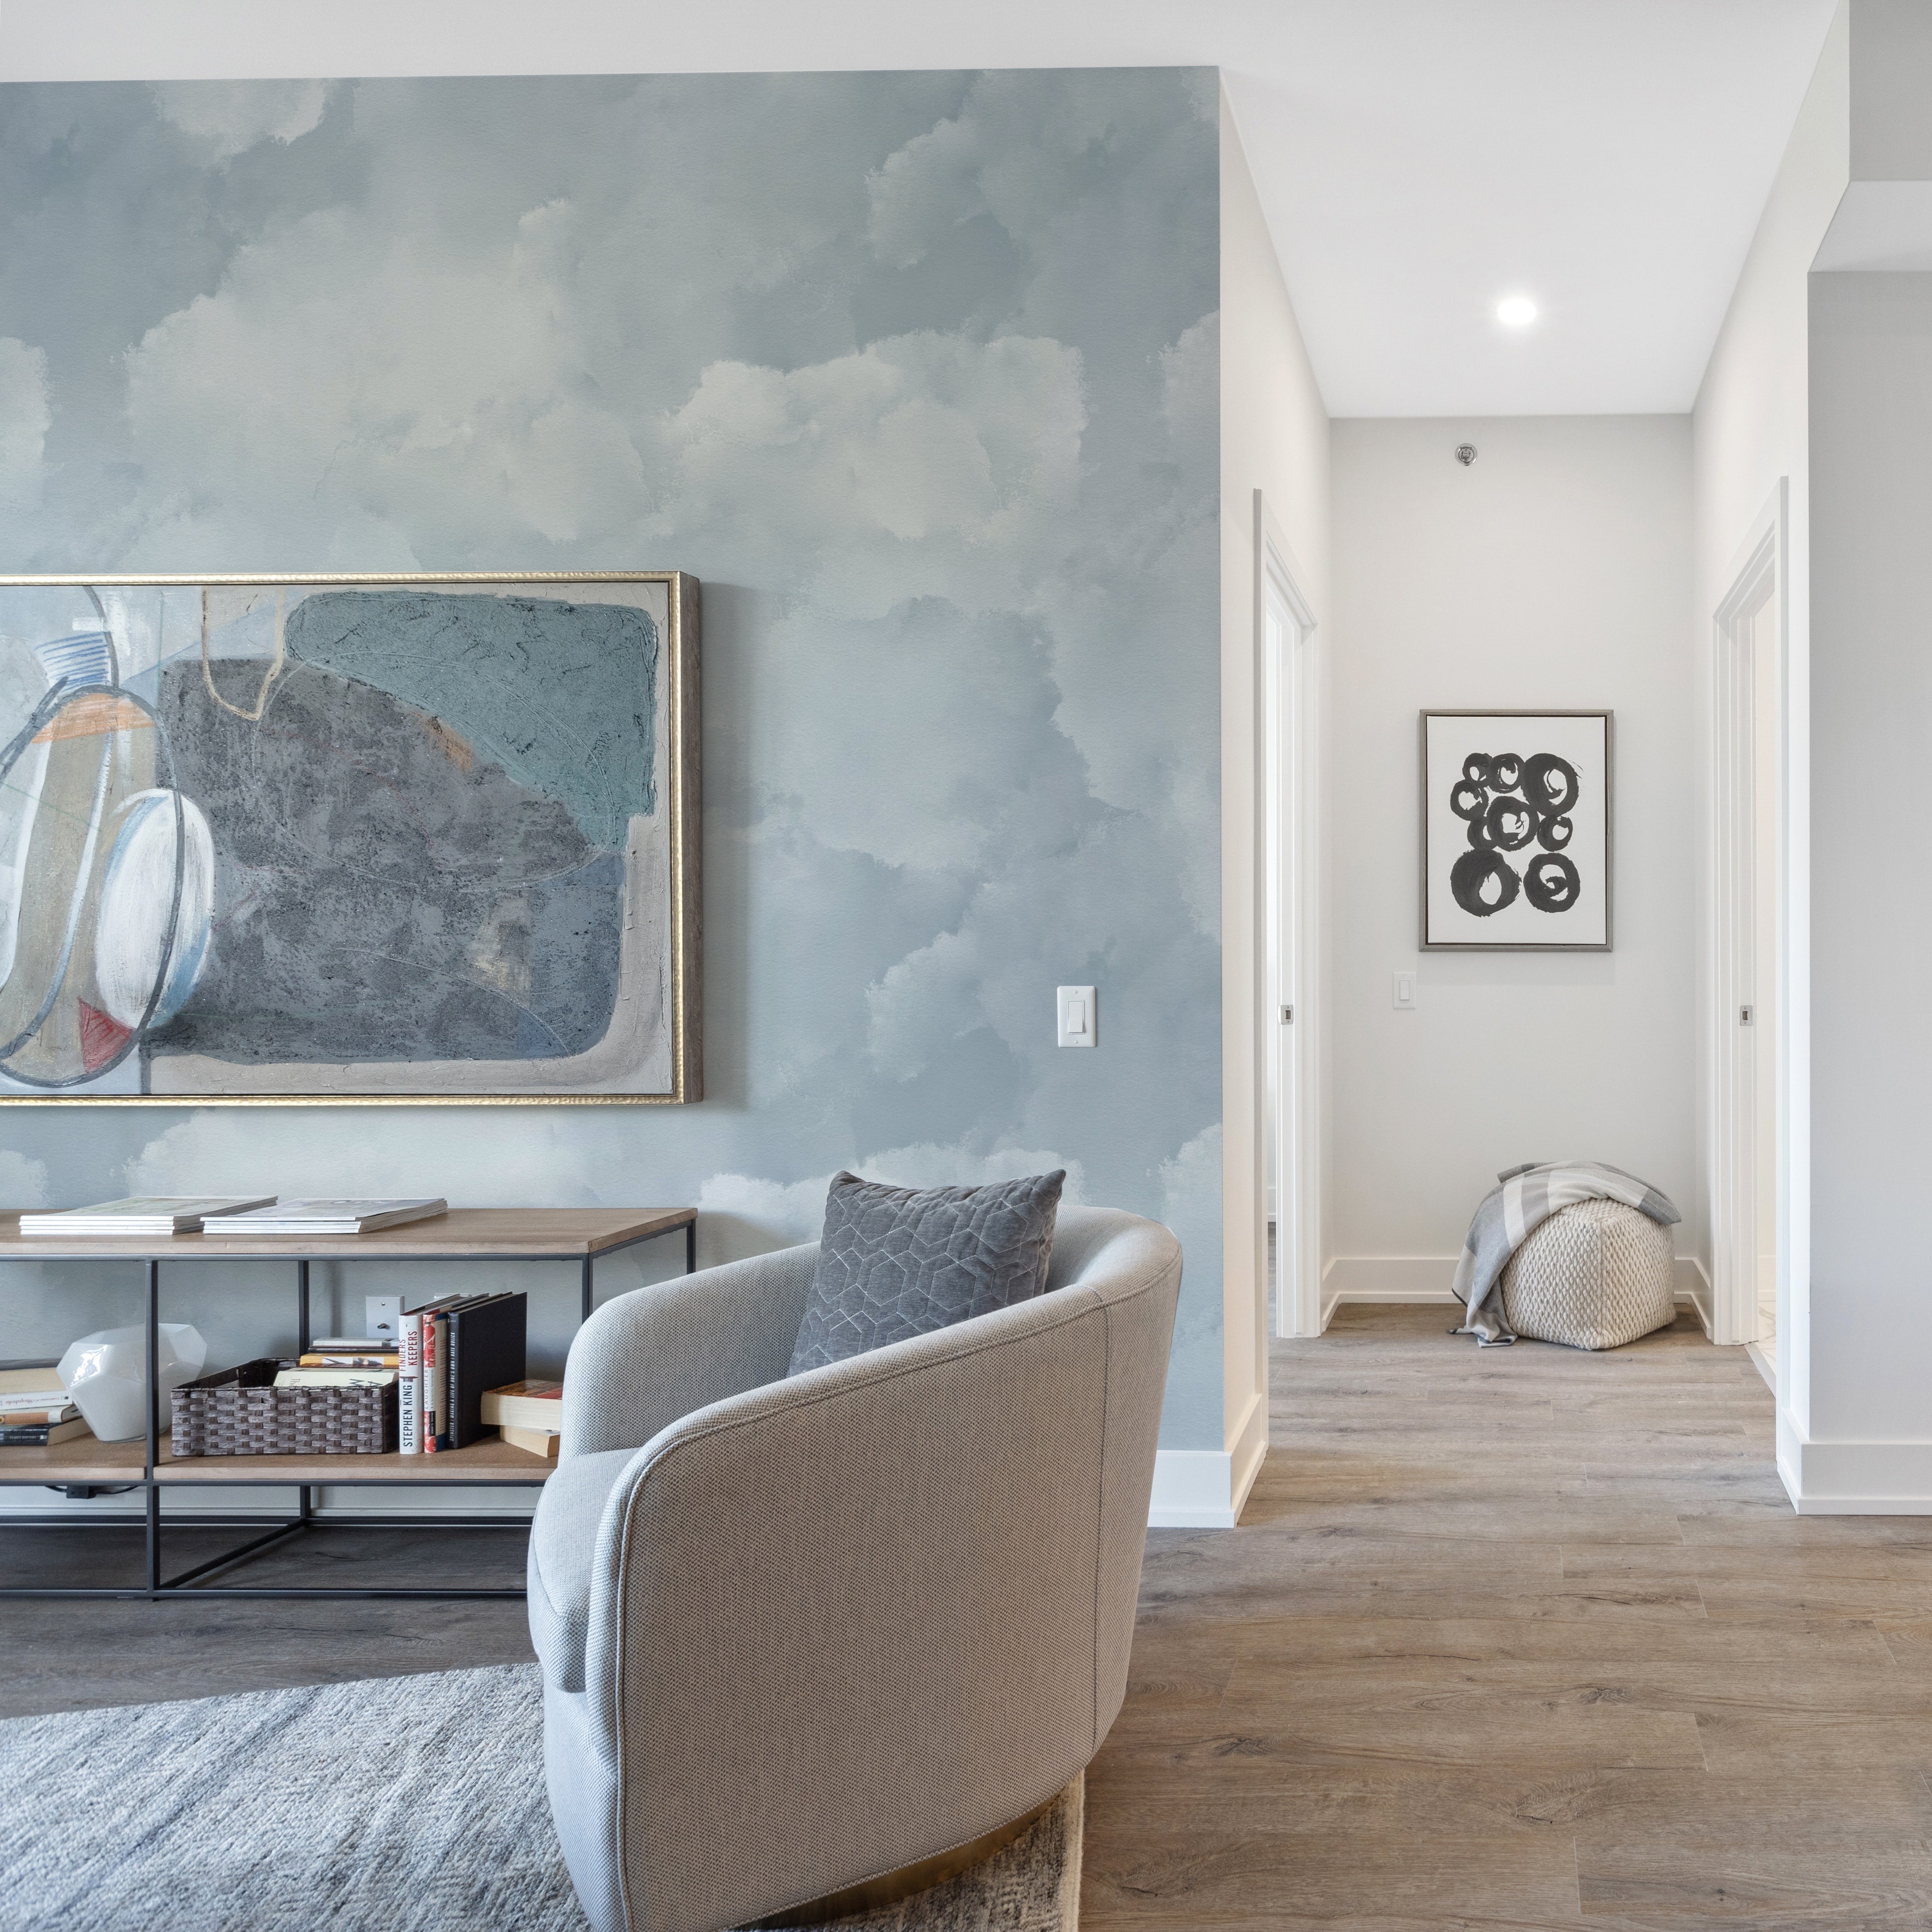 A modern living space featuring the Cloud Mural Wallpaper in Pale Blue on the wall, complementing a contemporary art piece and stylish furnishings. The wallpaper's soft cloud pattern enhances the room's airy and open feel